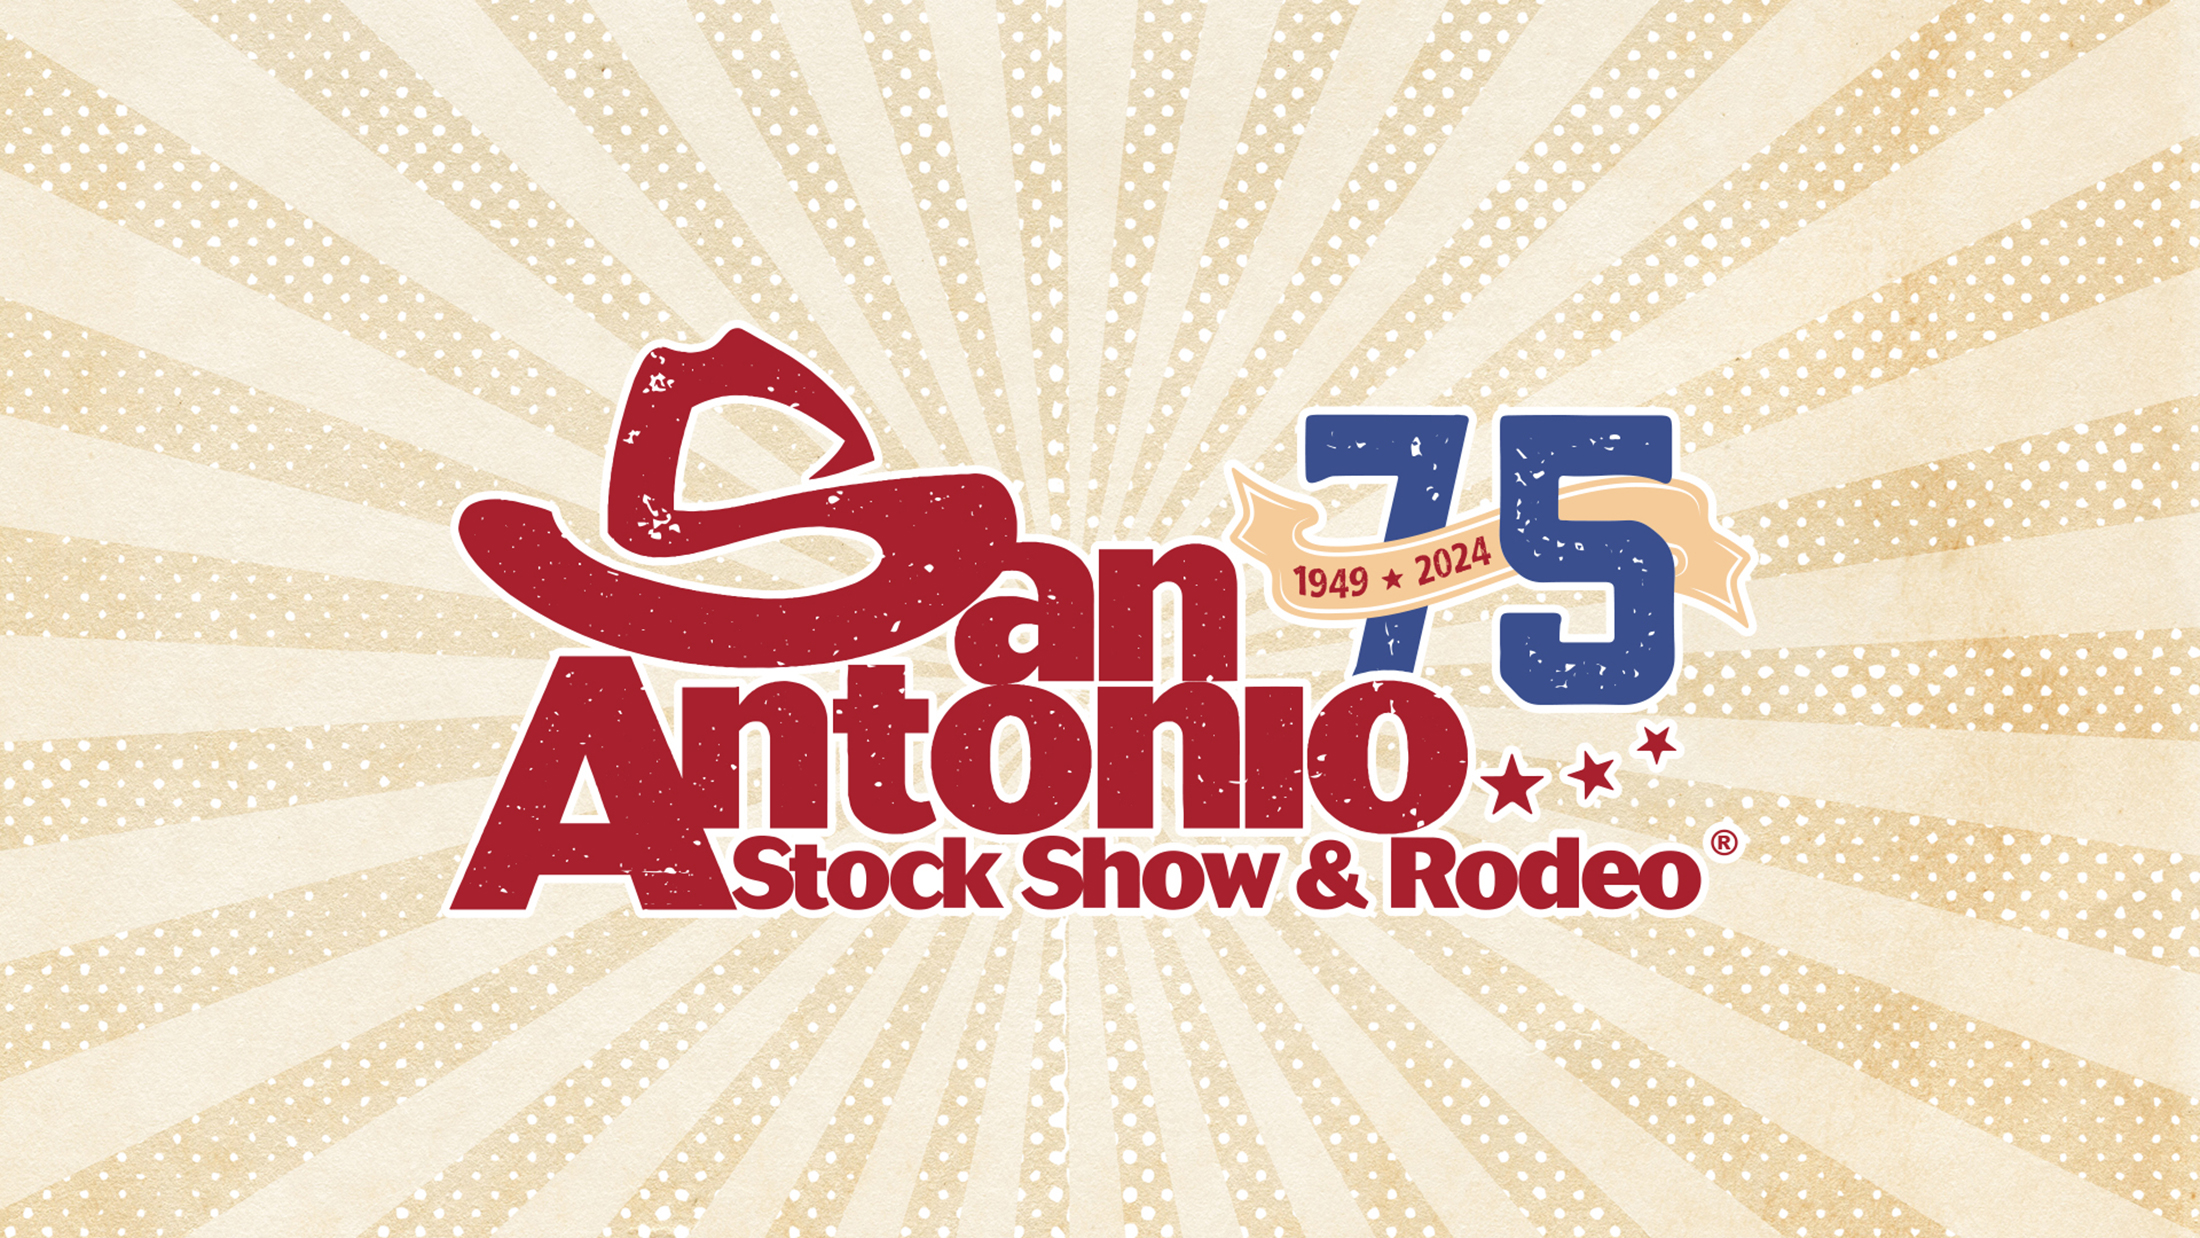 San Antonio Stock Show & Rodeo Finals followed by TBA